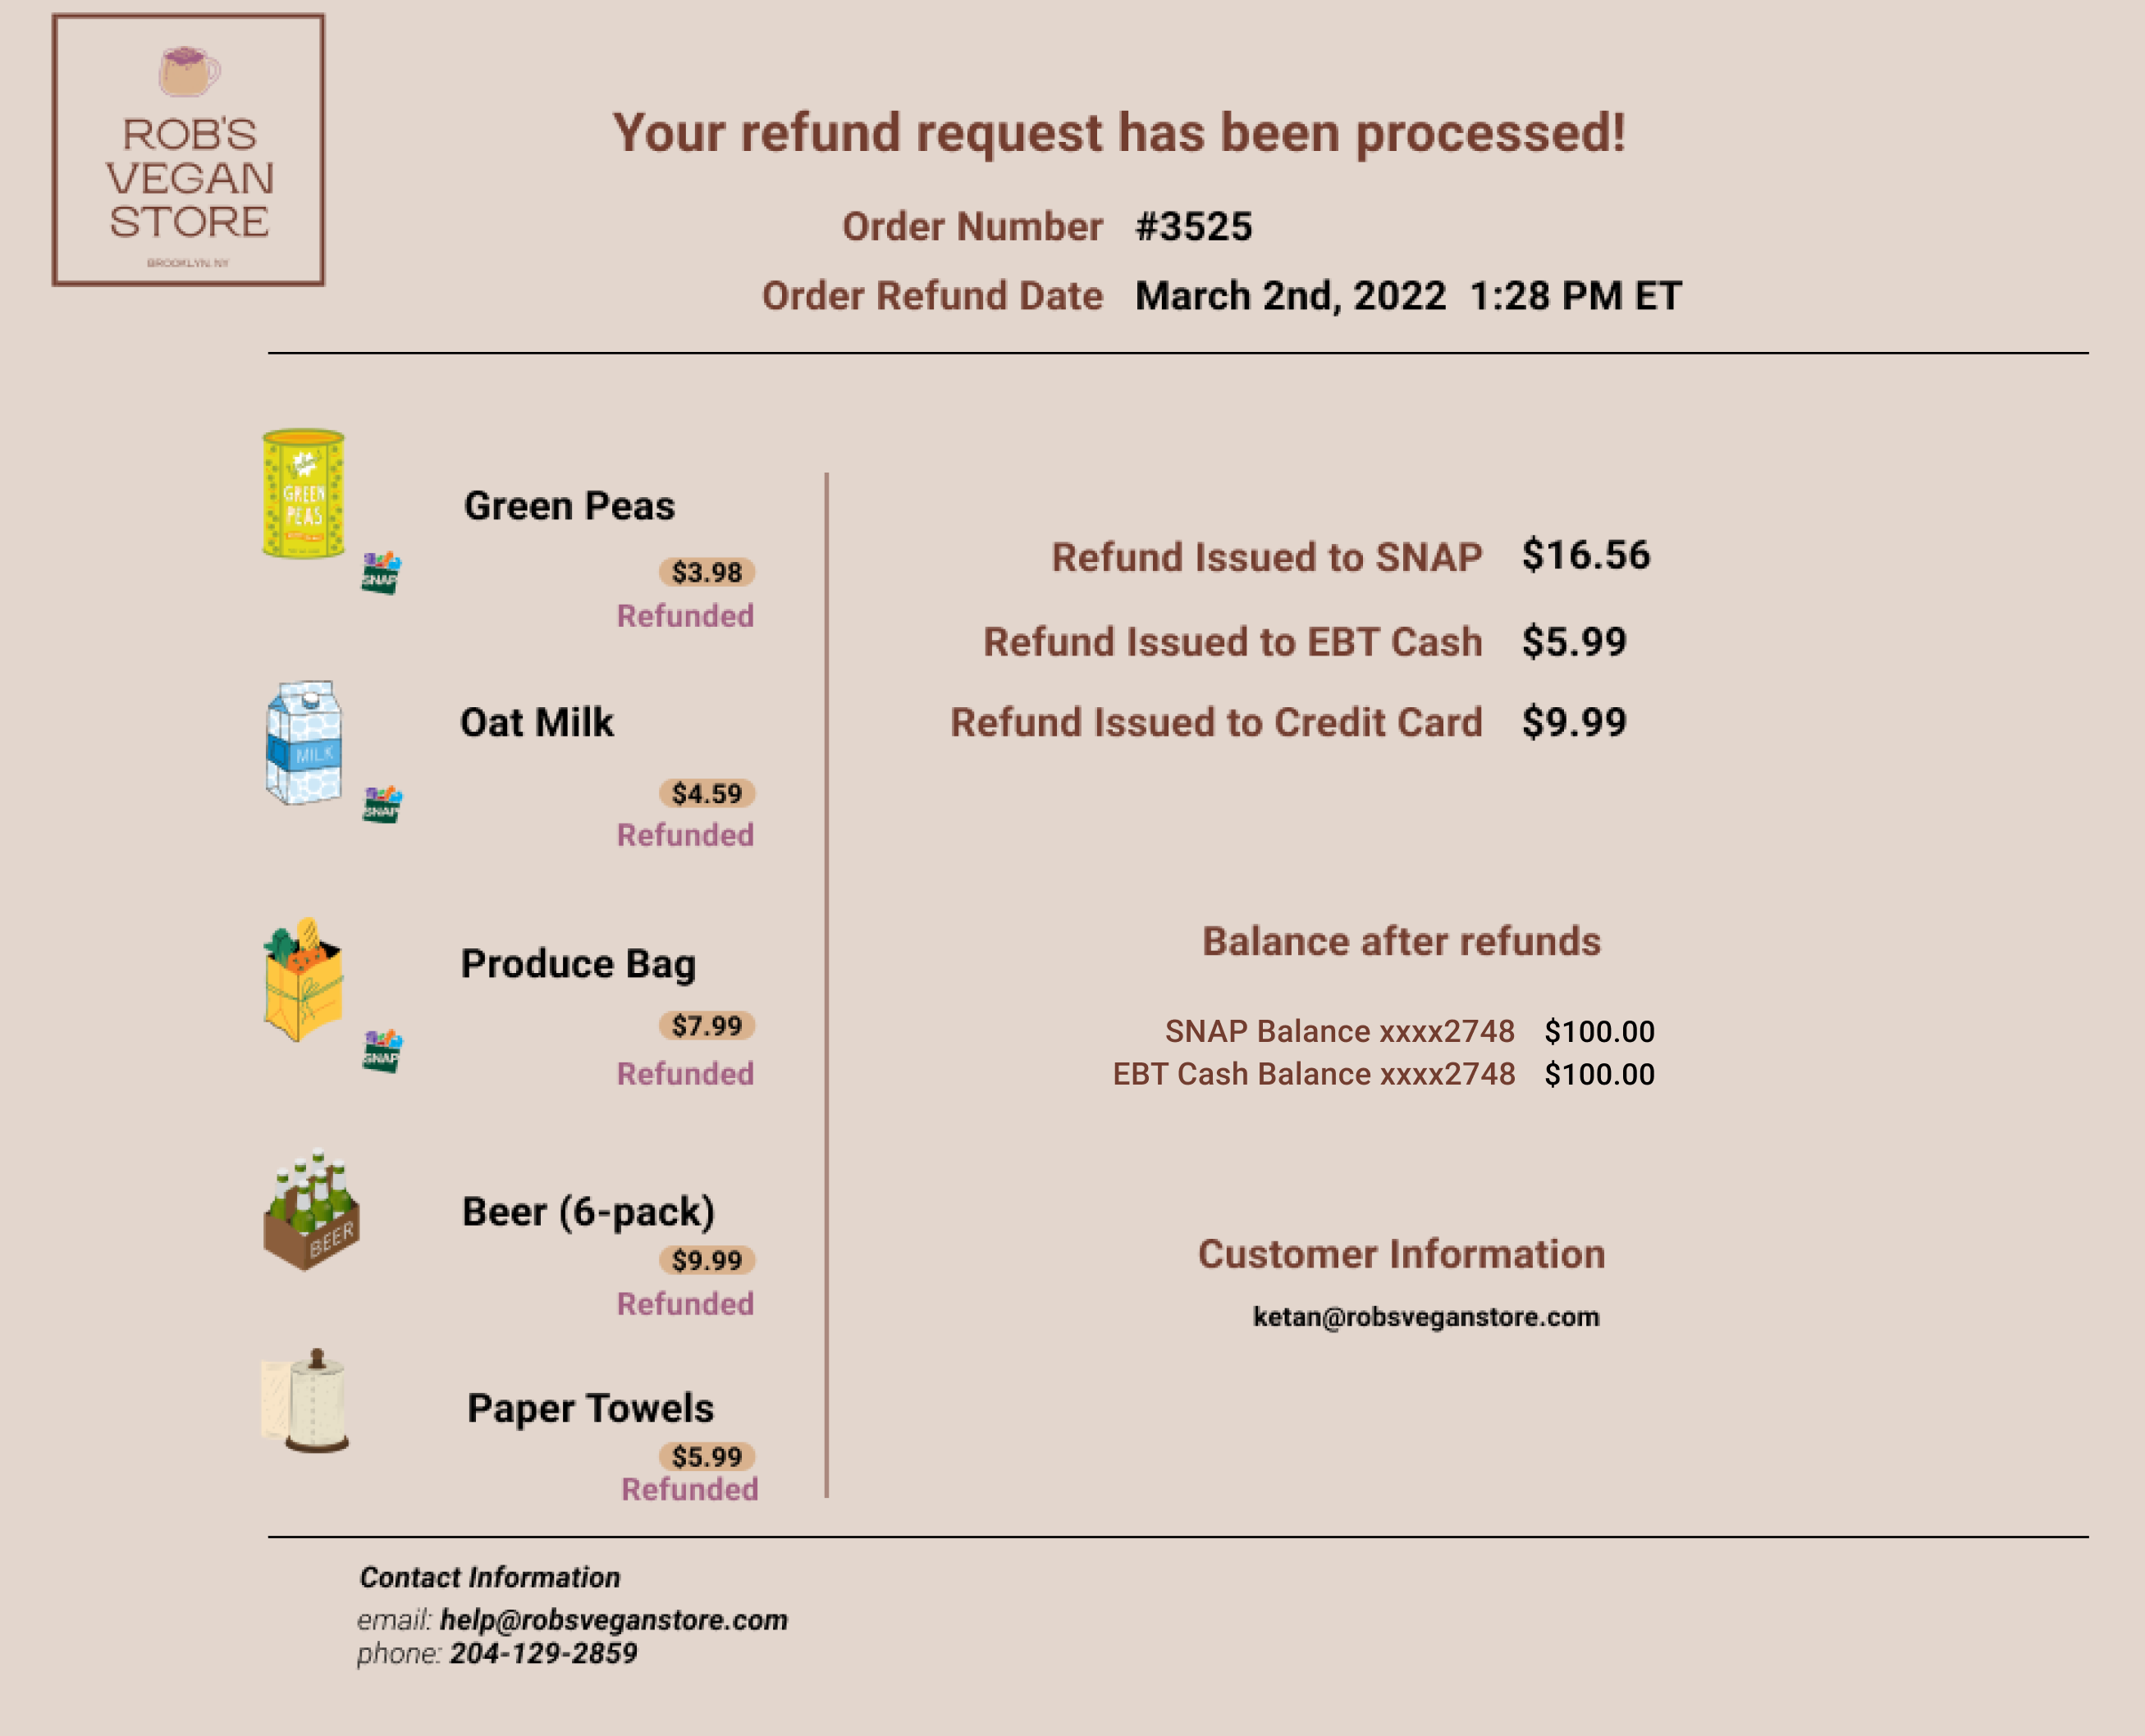 Rob's Vegan store refund confirmation screen lists what items are refunded to what tender types along with other FNS requirements